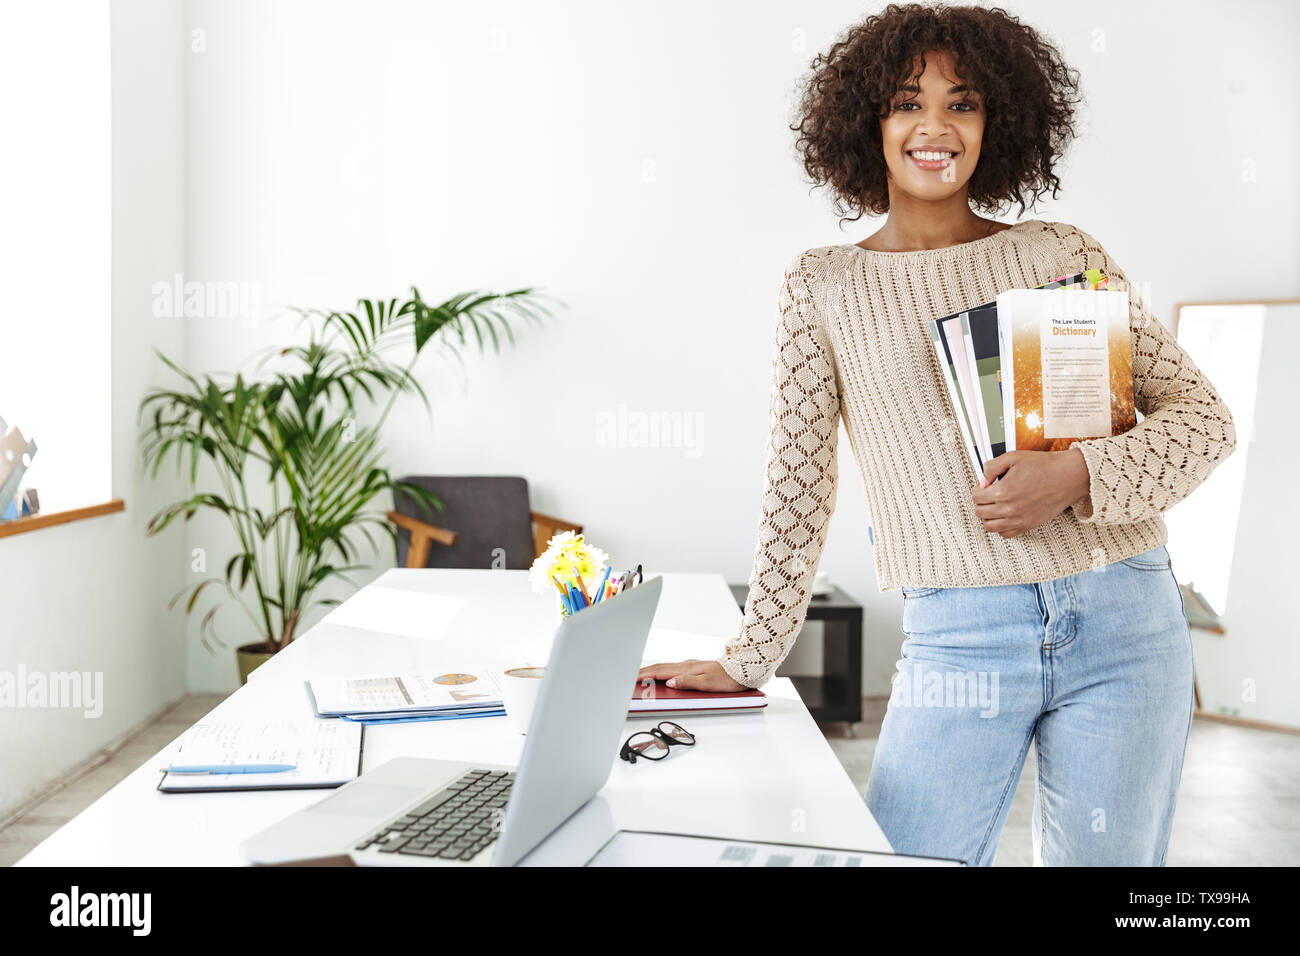 Cheerful african woman wearing in casual clothes holding magazines and looking at the camera while standing near the table at office Stock Photo